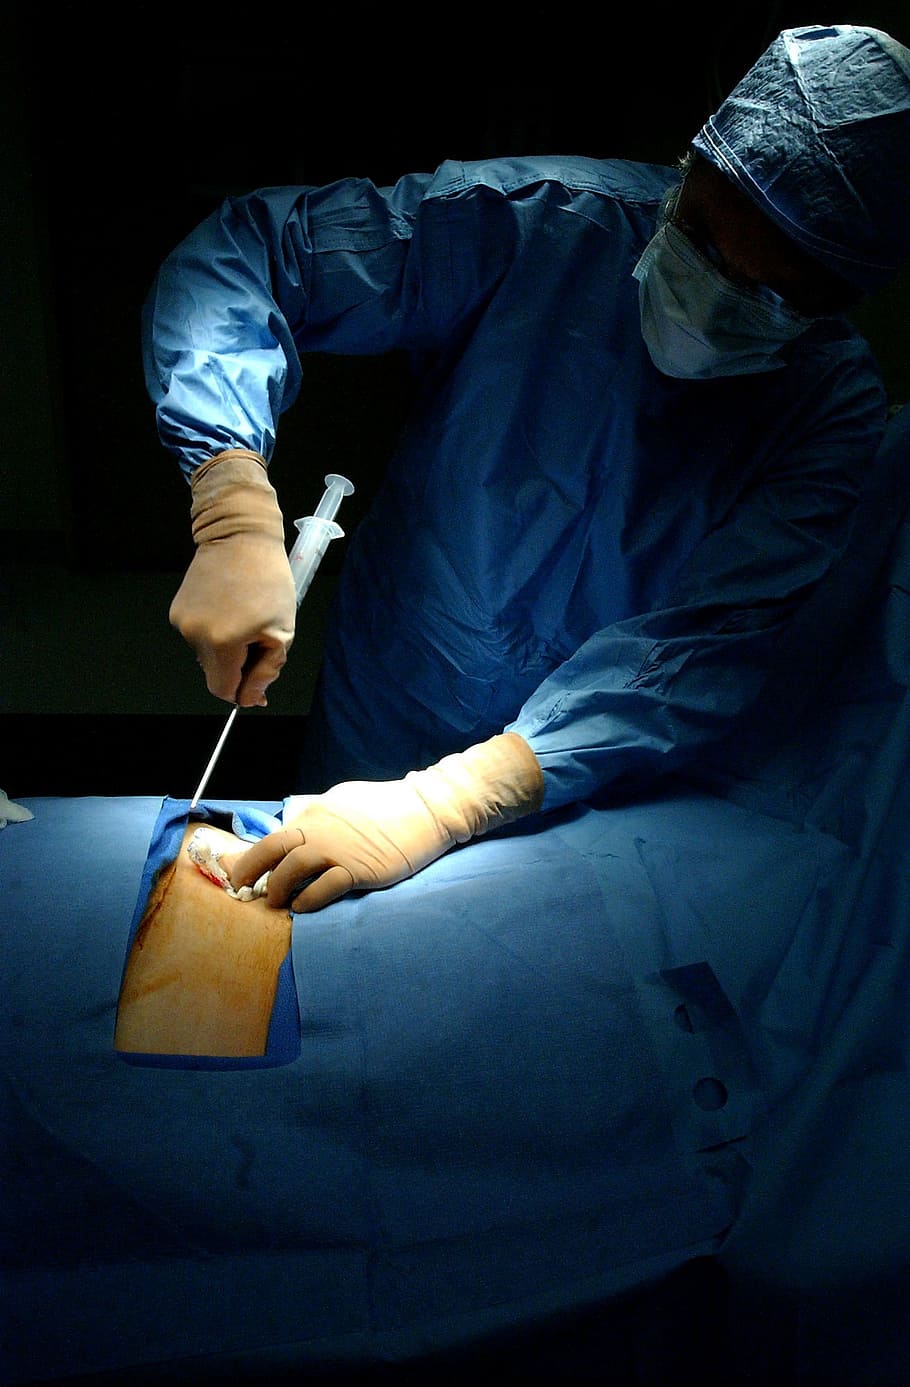 surgeon performing surgery on patient's body, operation, hospital